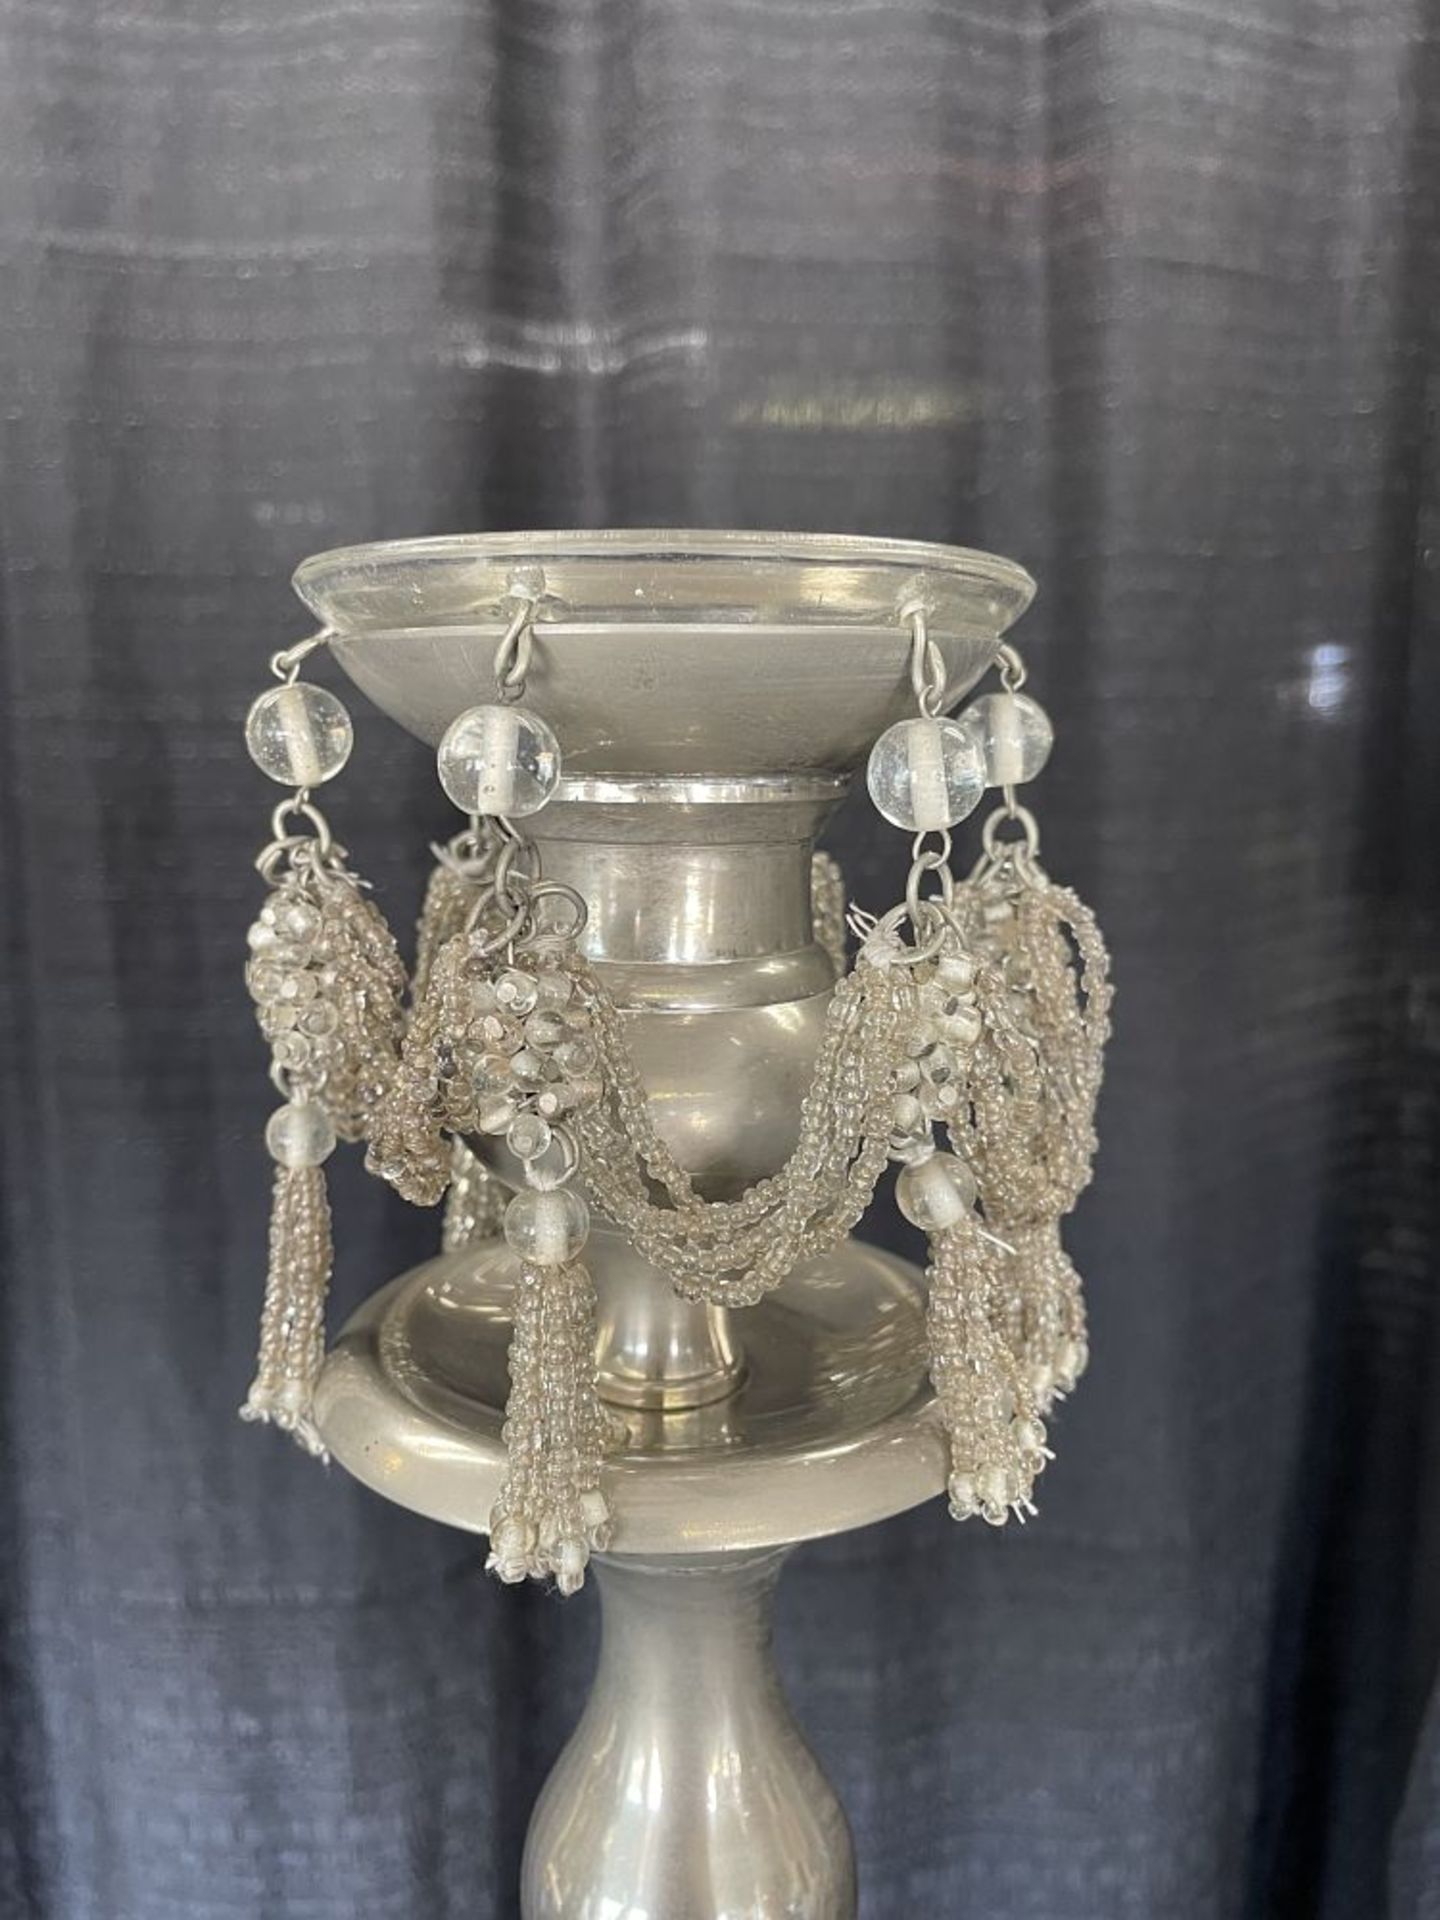 Beaded Cups for Candelabra